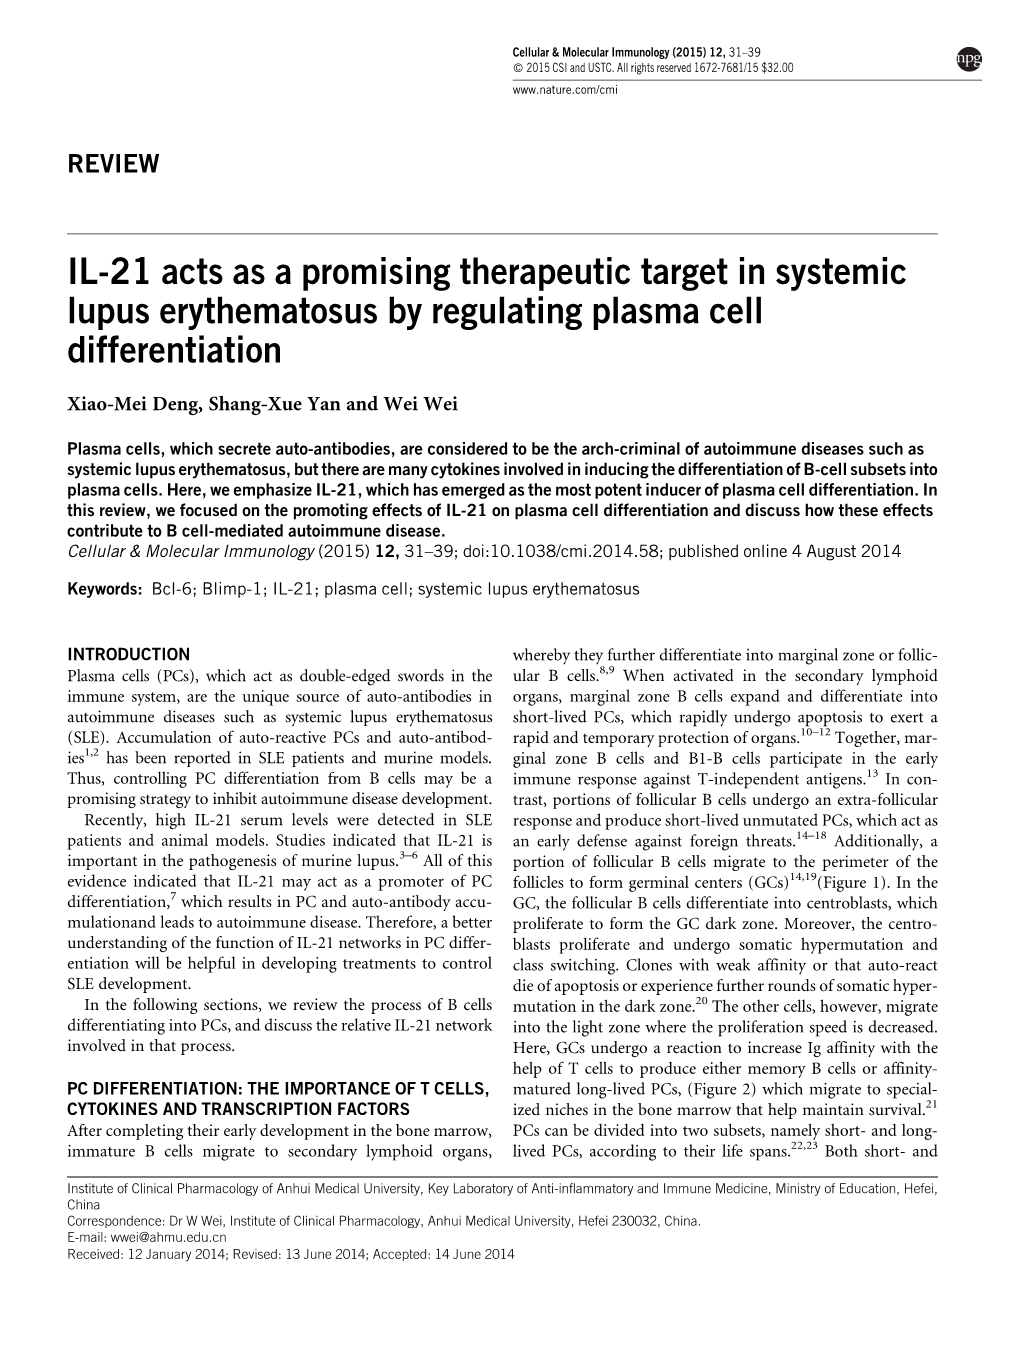 IL-21 Acts As a Promising Therapeutic Target in Systemic Lupus Erythematosus by Regulating Plasma Cell Differentiation